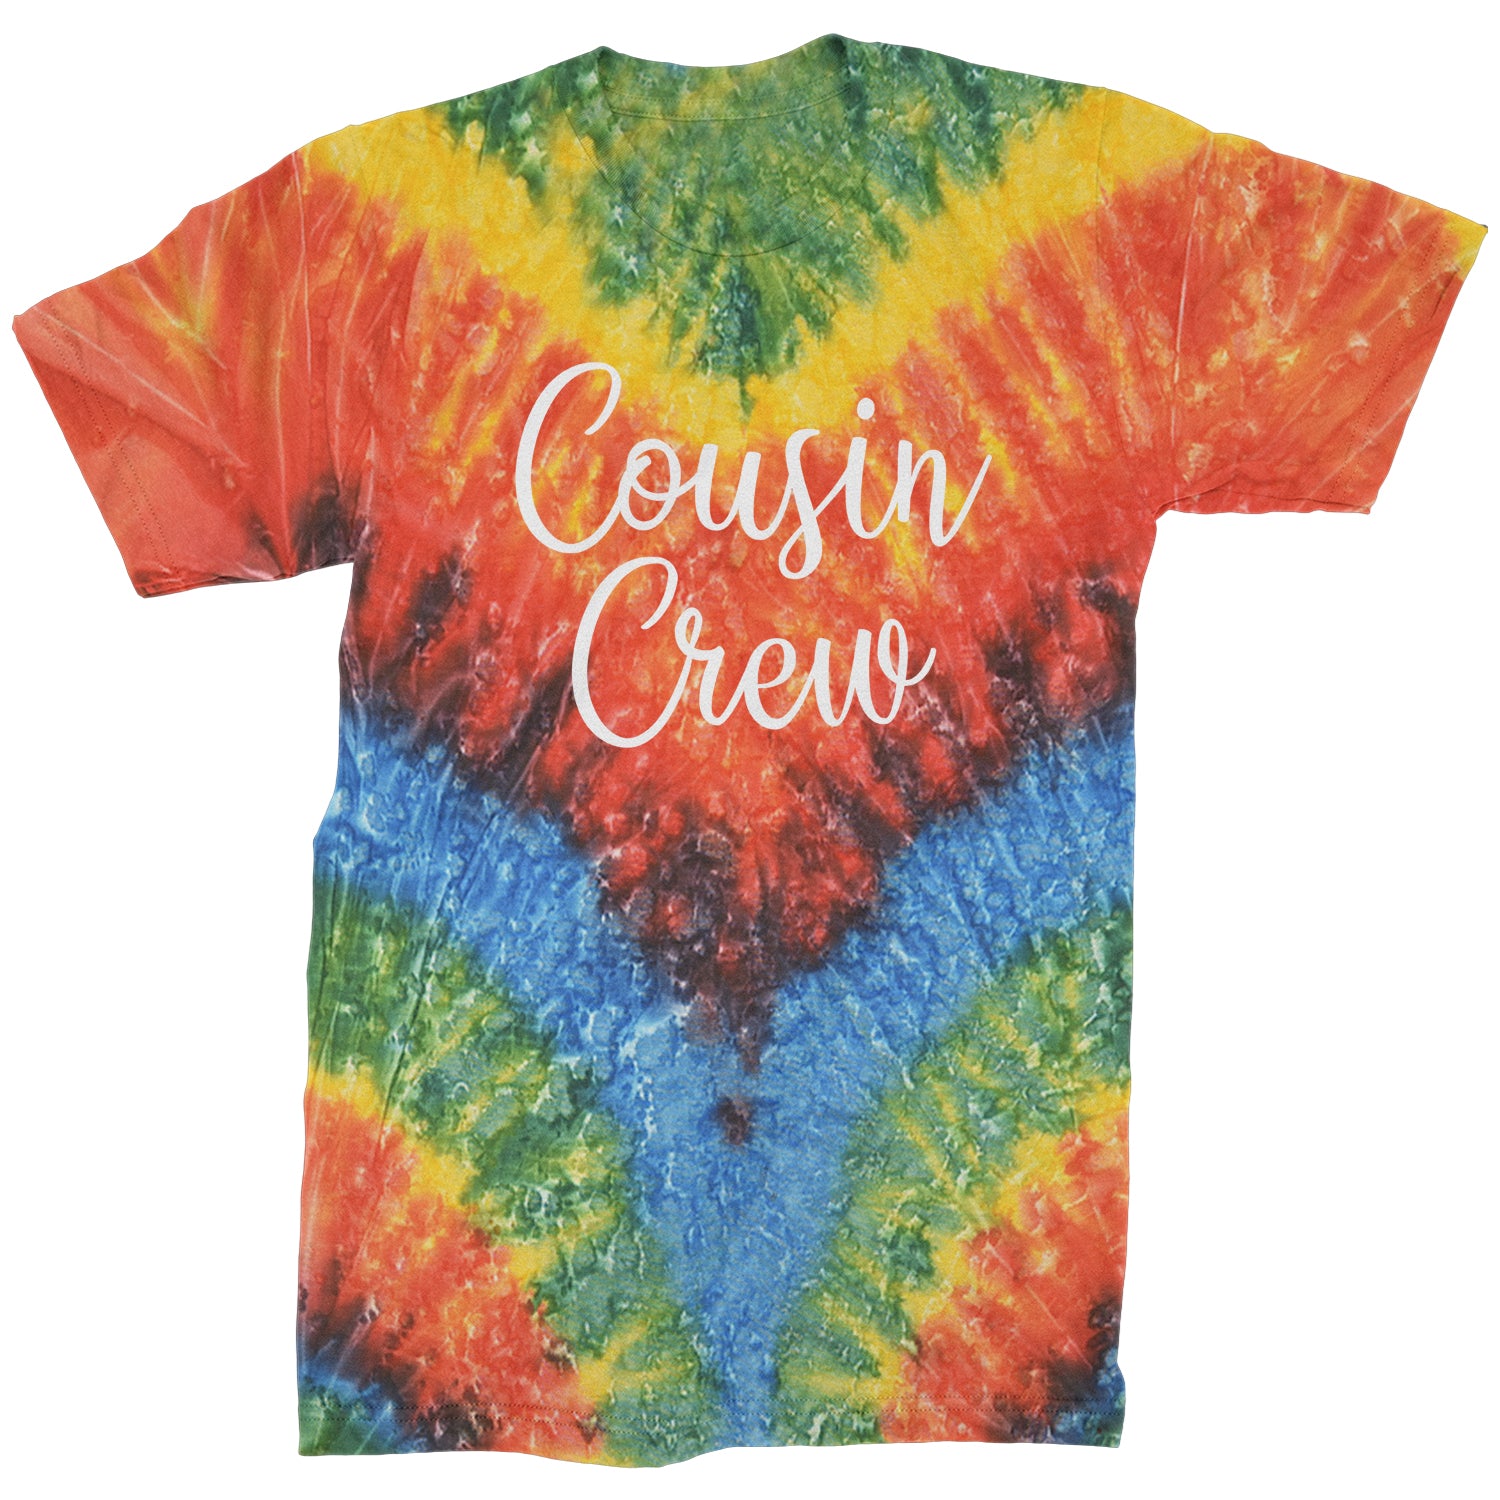 Cousin Crew Fun Family Outfit Mens T-shirt barbecue, bbq, cook, family, out, reunion by Expression Tees